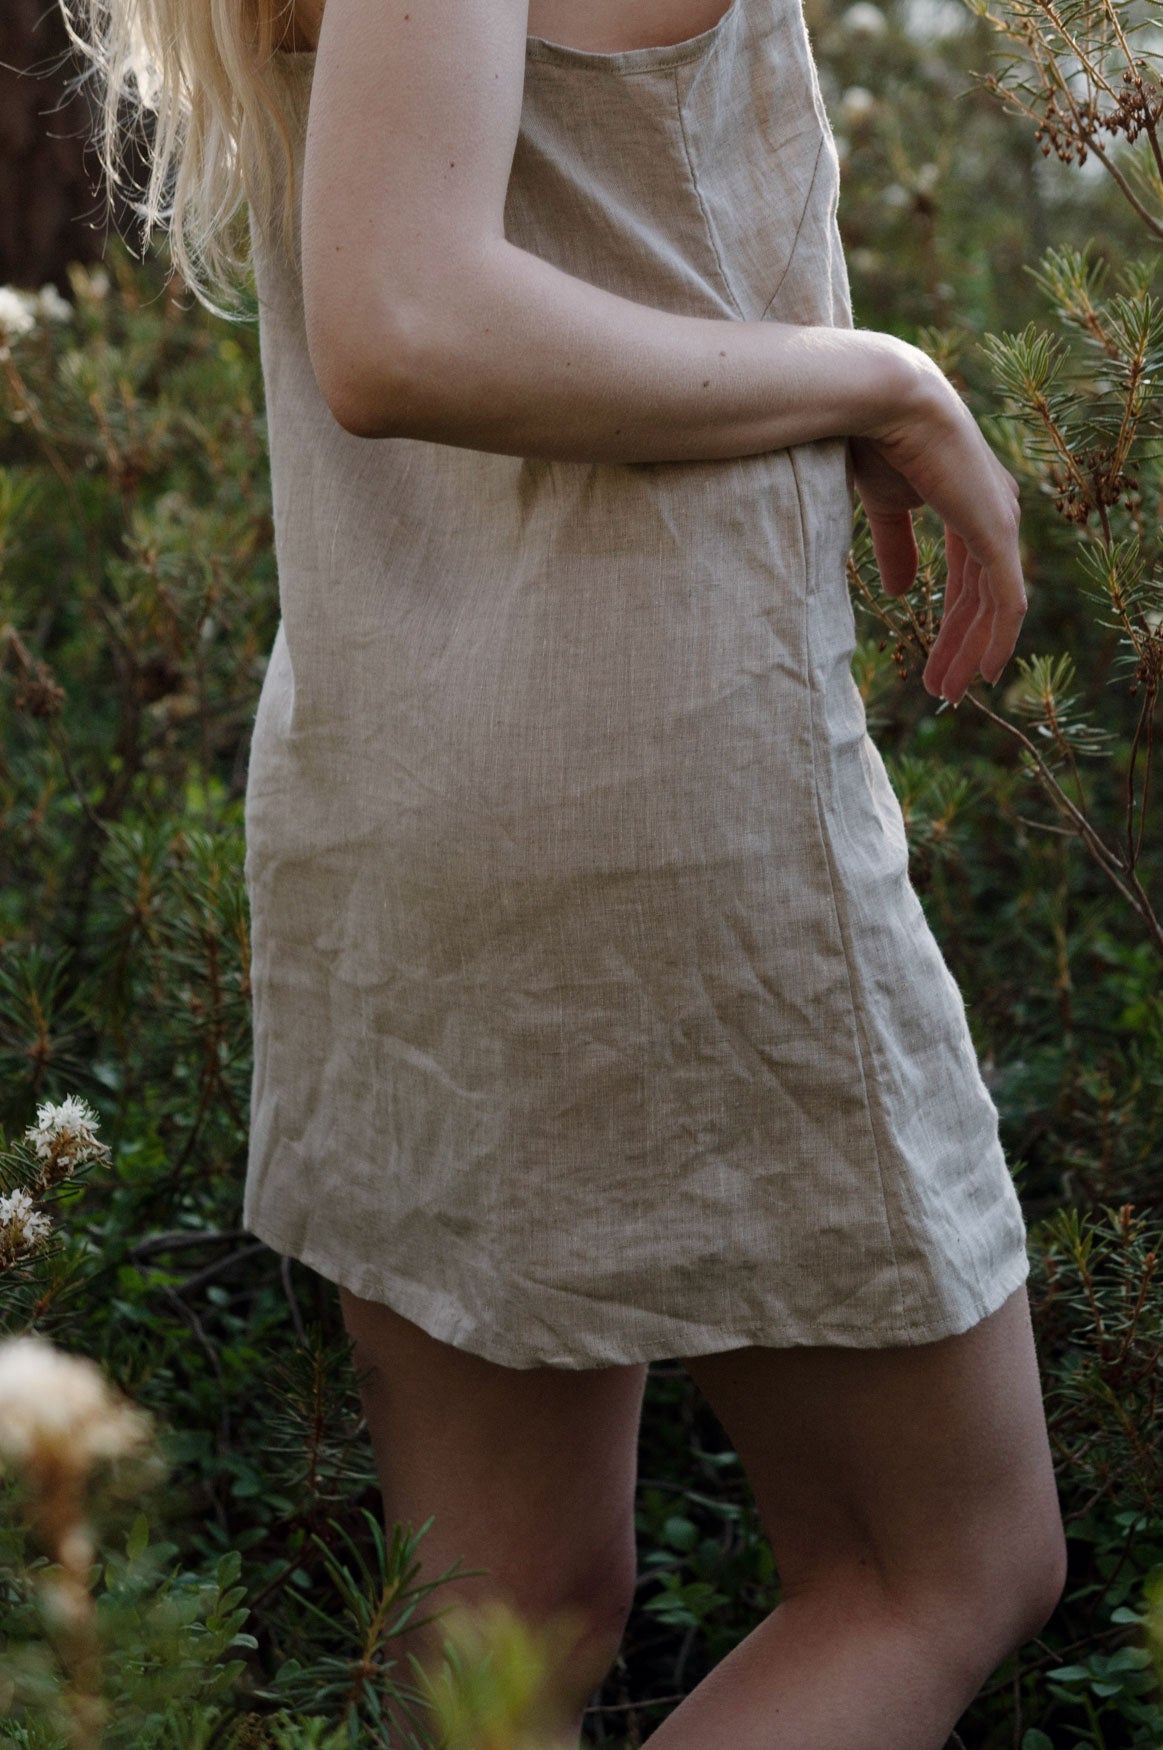 Organic, sustainable and sexy at the same time! Agasåga black short natural linen slip dress, nightdress with straps. This sleepwear is natural, soft, breathable and pure. It’s a conscious and healthy choice for your body and environment that embraces genuine selflove and selfcare. Handmade with love in the North.